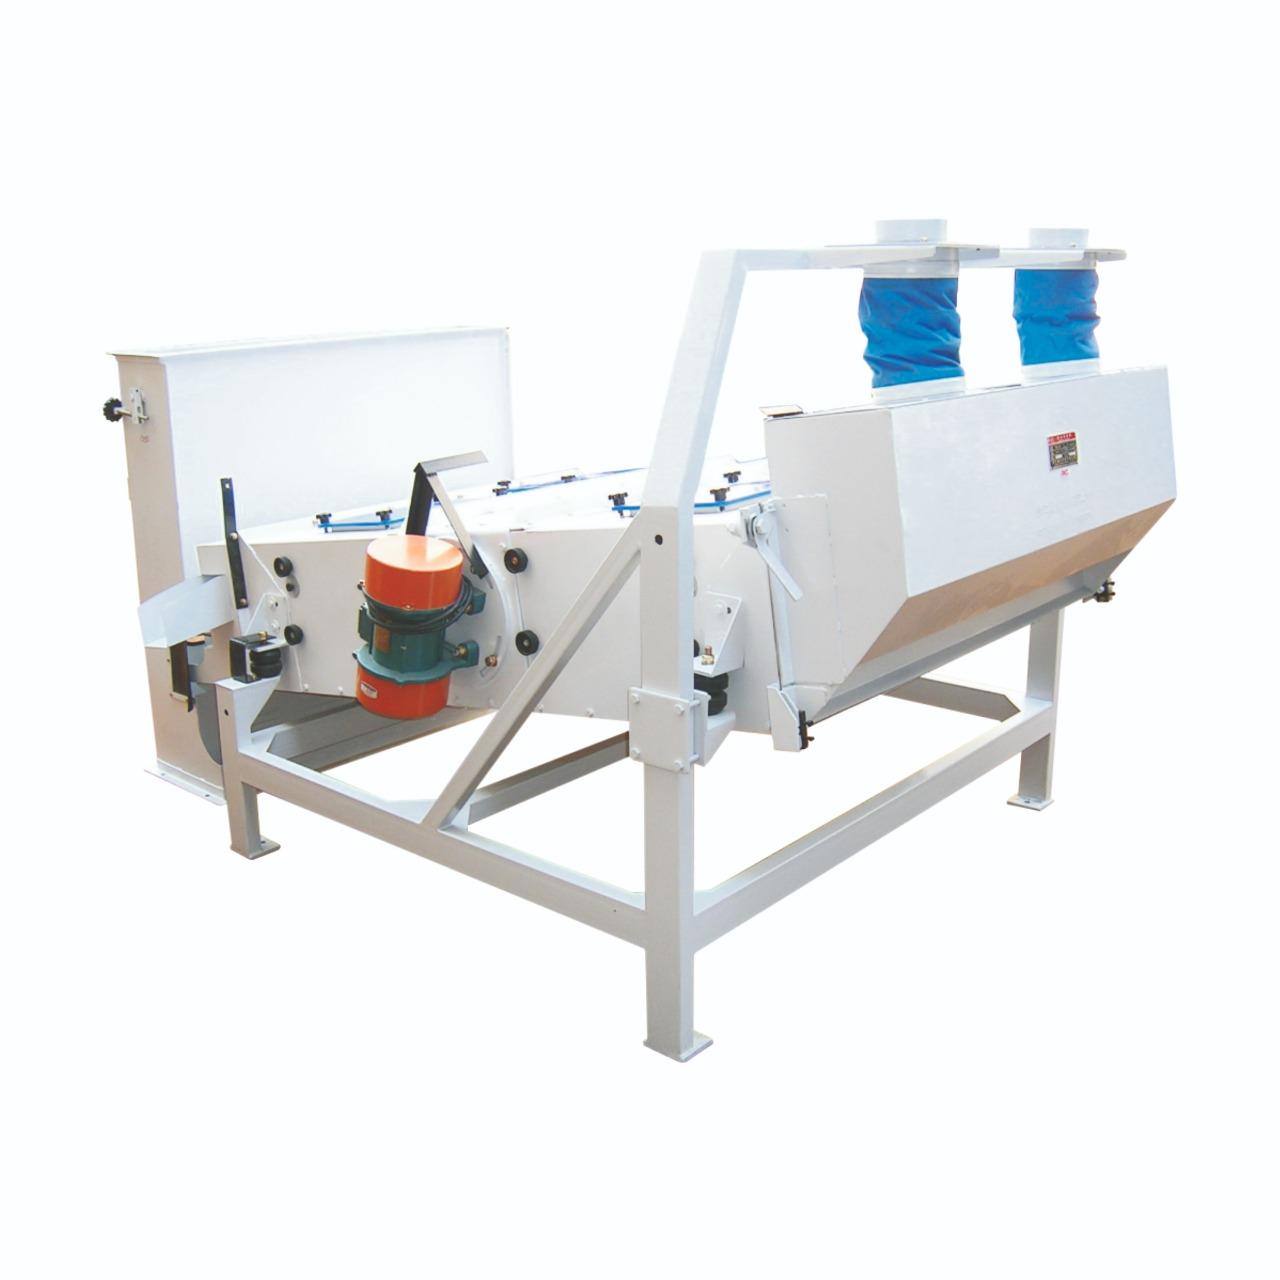 Fine Cleaner Machine for Rice Mills in India - Kinetic Group